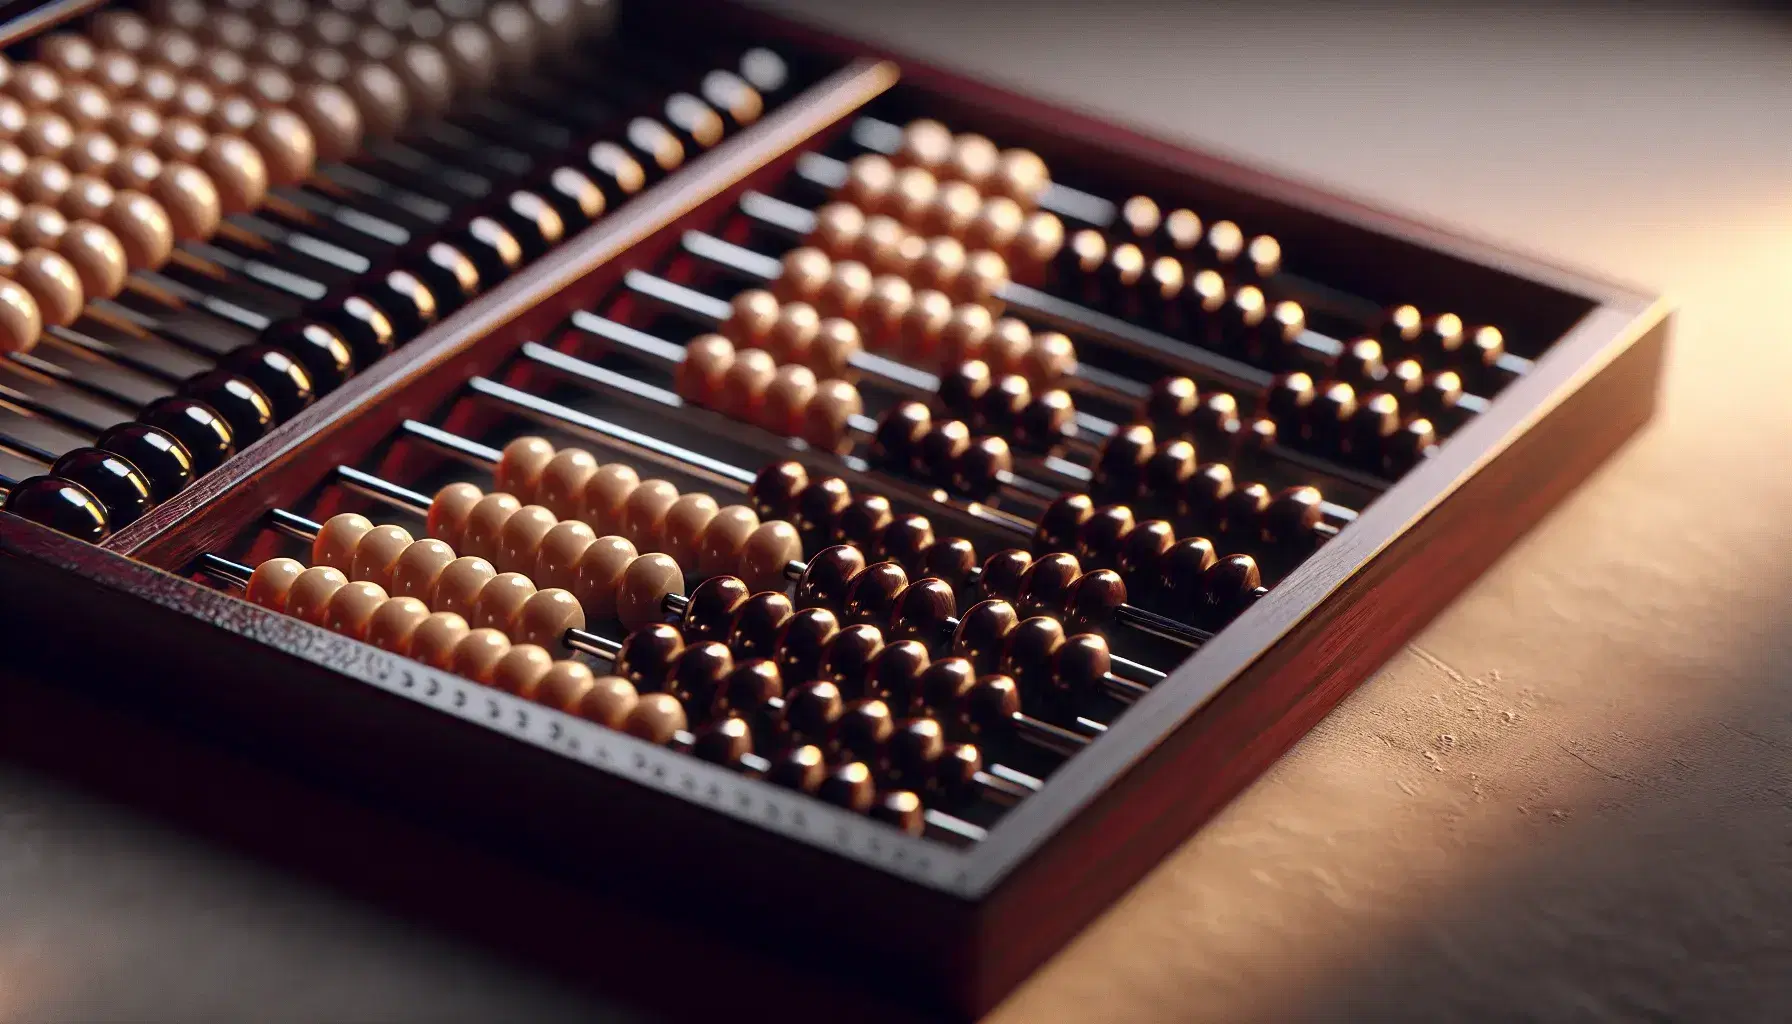 Close-up view of a traditional wooden abacus with ivory-colored beads, ten per rod, separated by a central divider, in soft lighting.